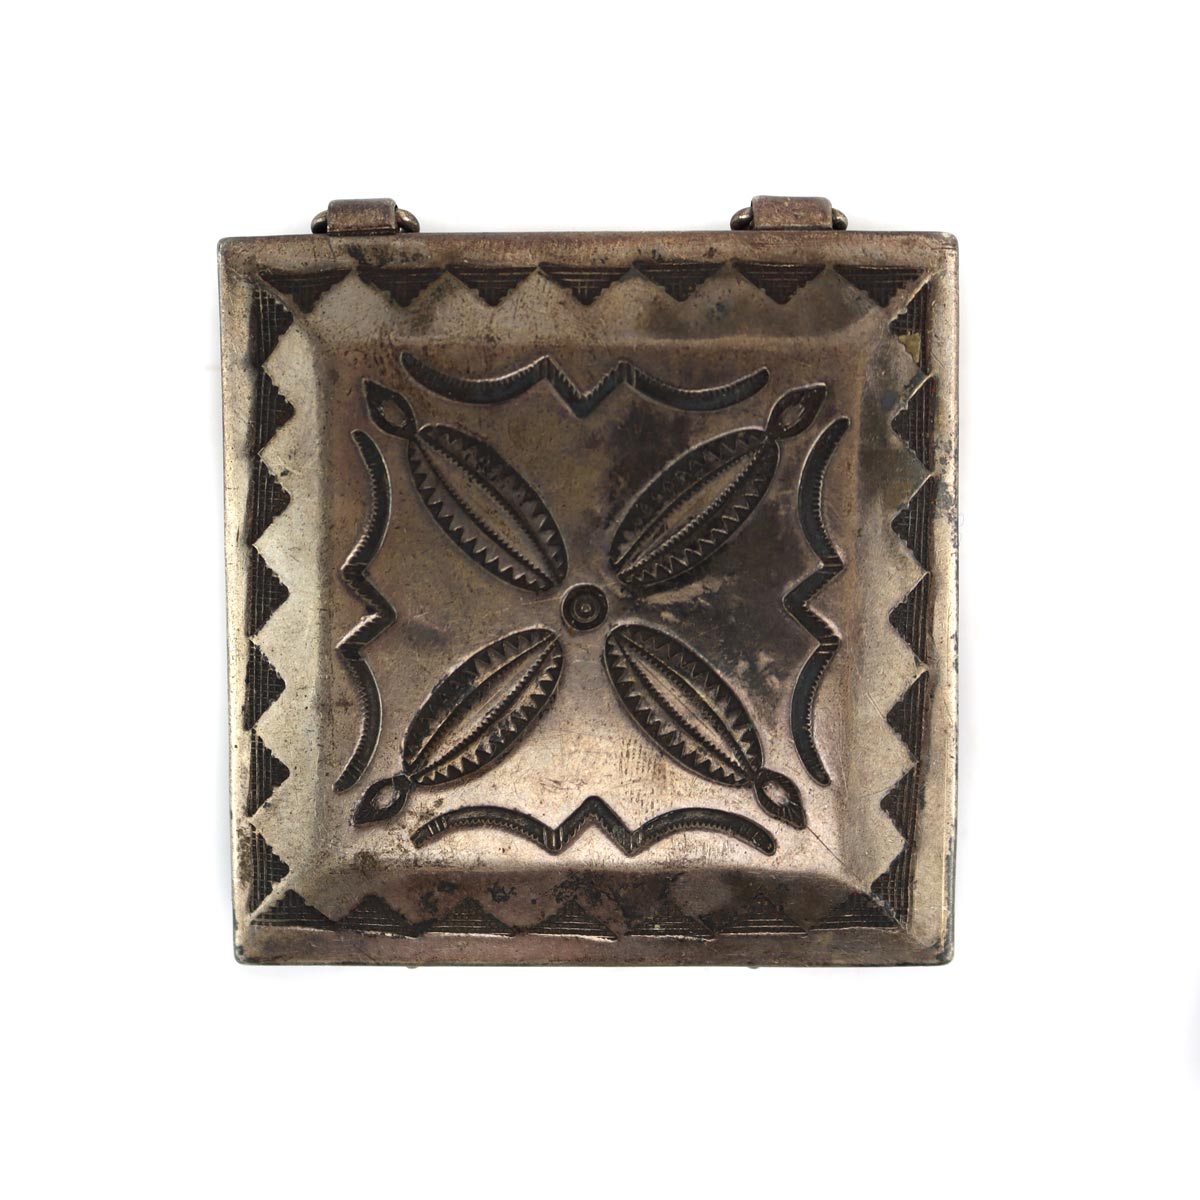 Navajo - Silver Lidded Box with Stamped Design c. 1940s, 0.625" x 2.125" x 2.125"